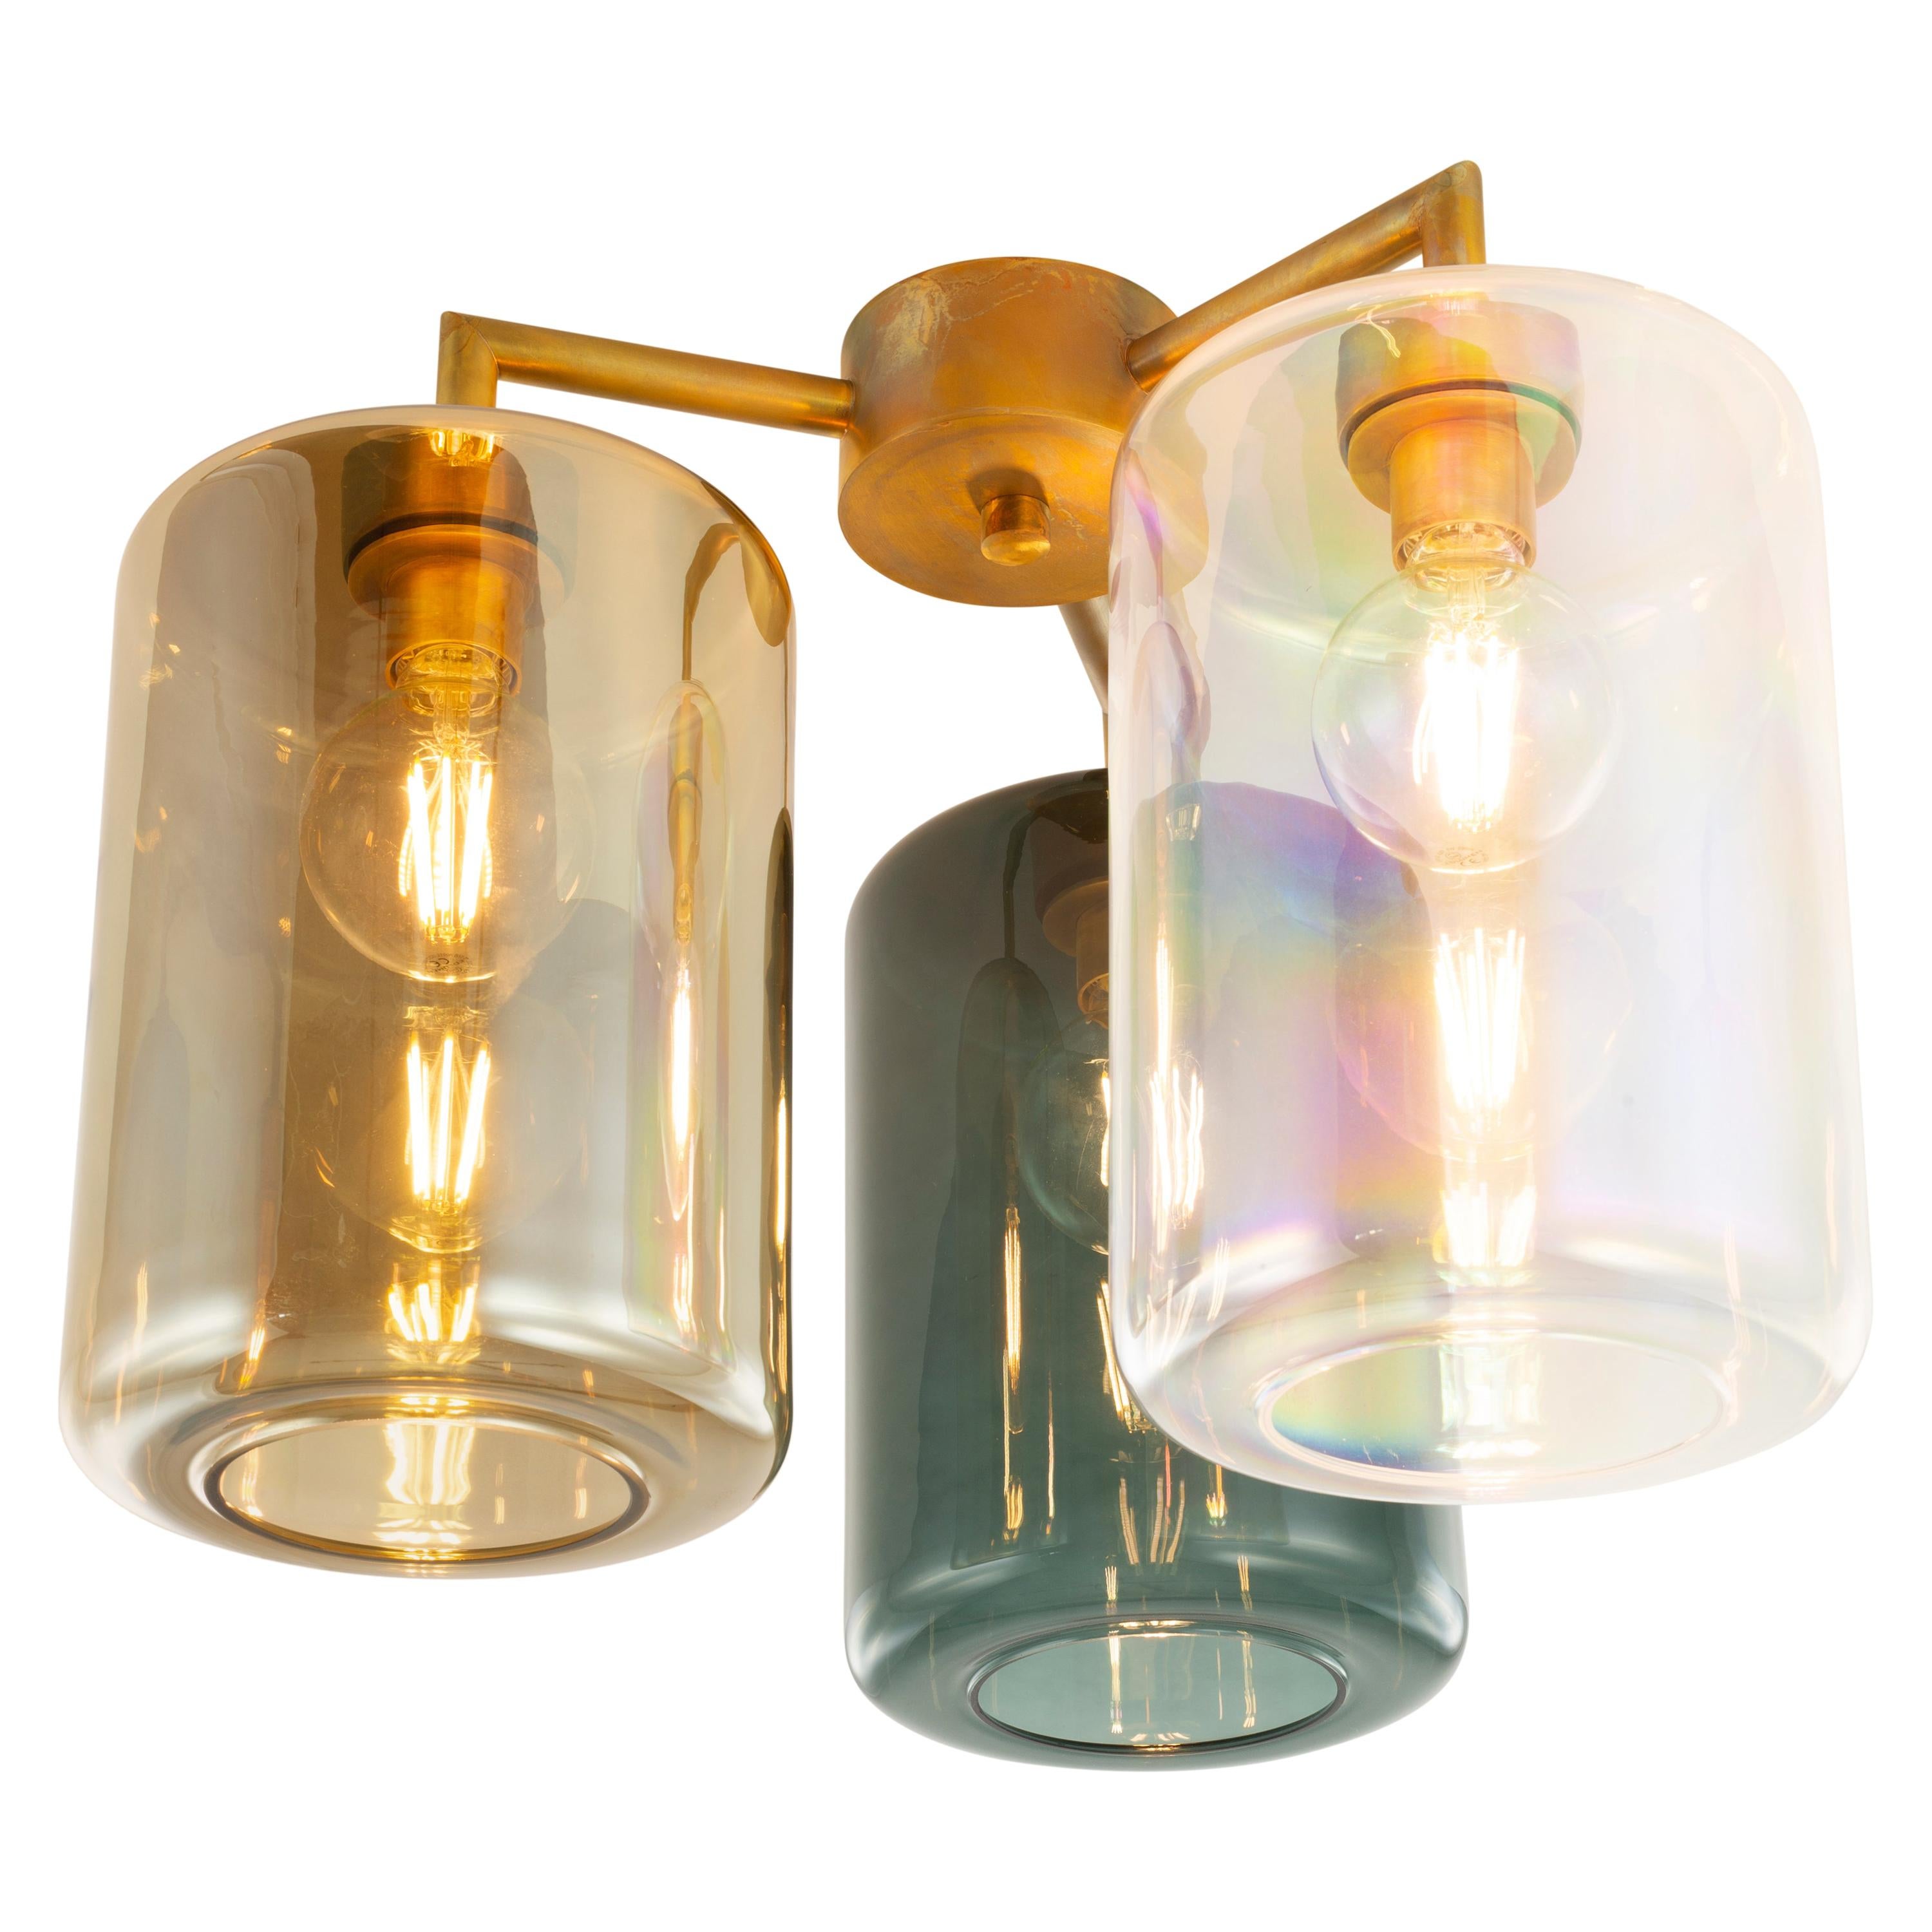 Modern Flush Mount with Colored Glass in a Brass Burnished Finish, Louise